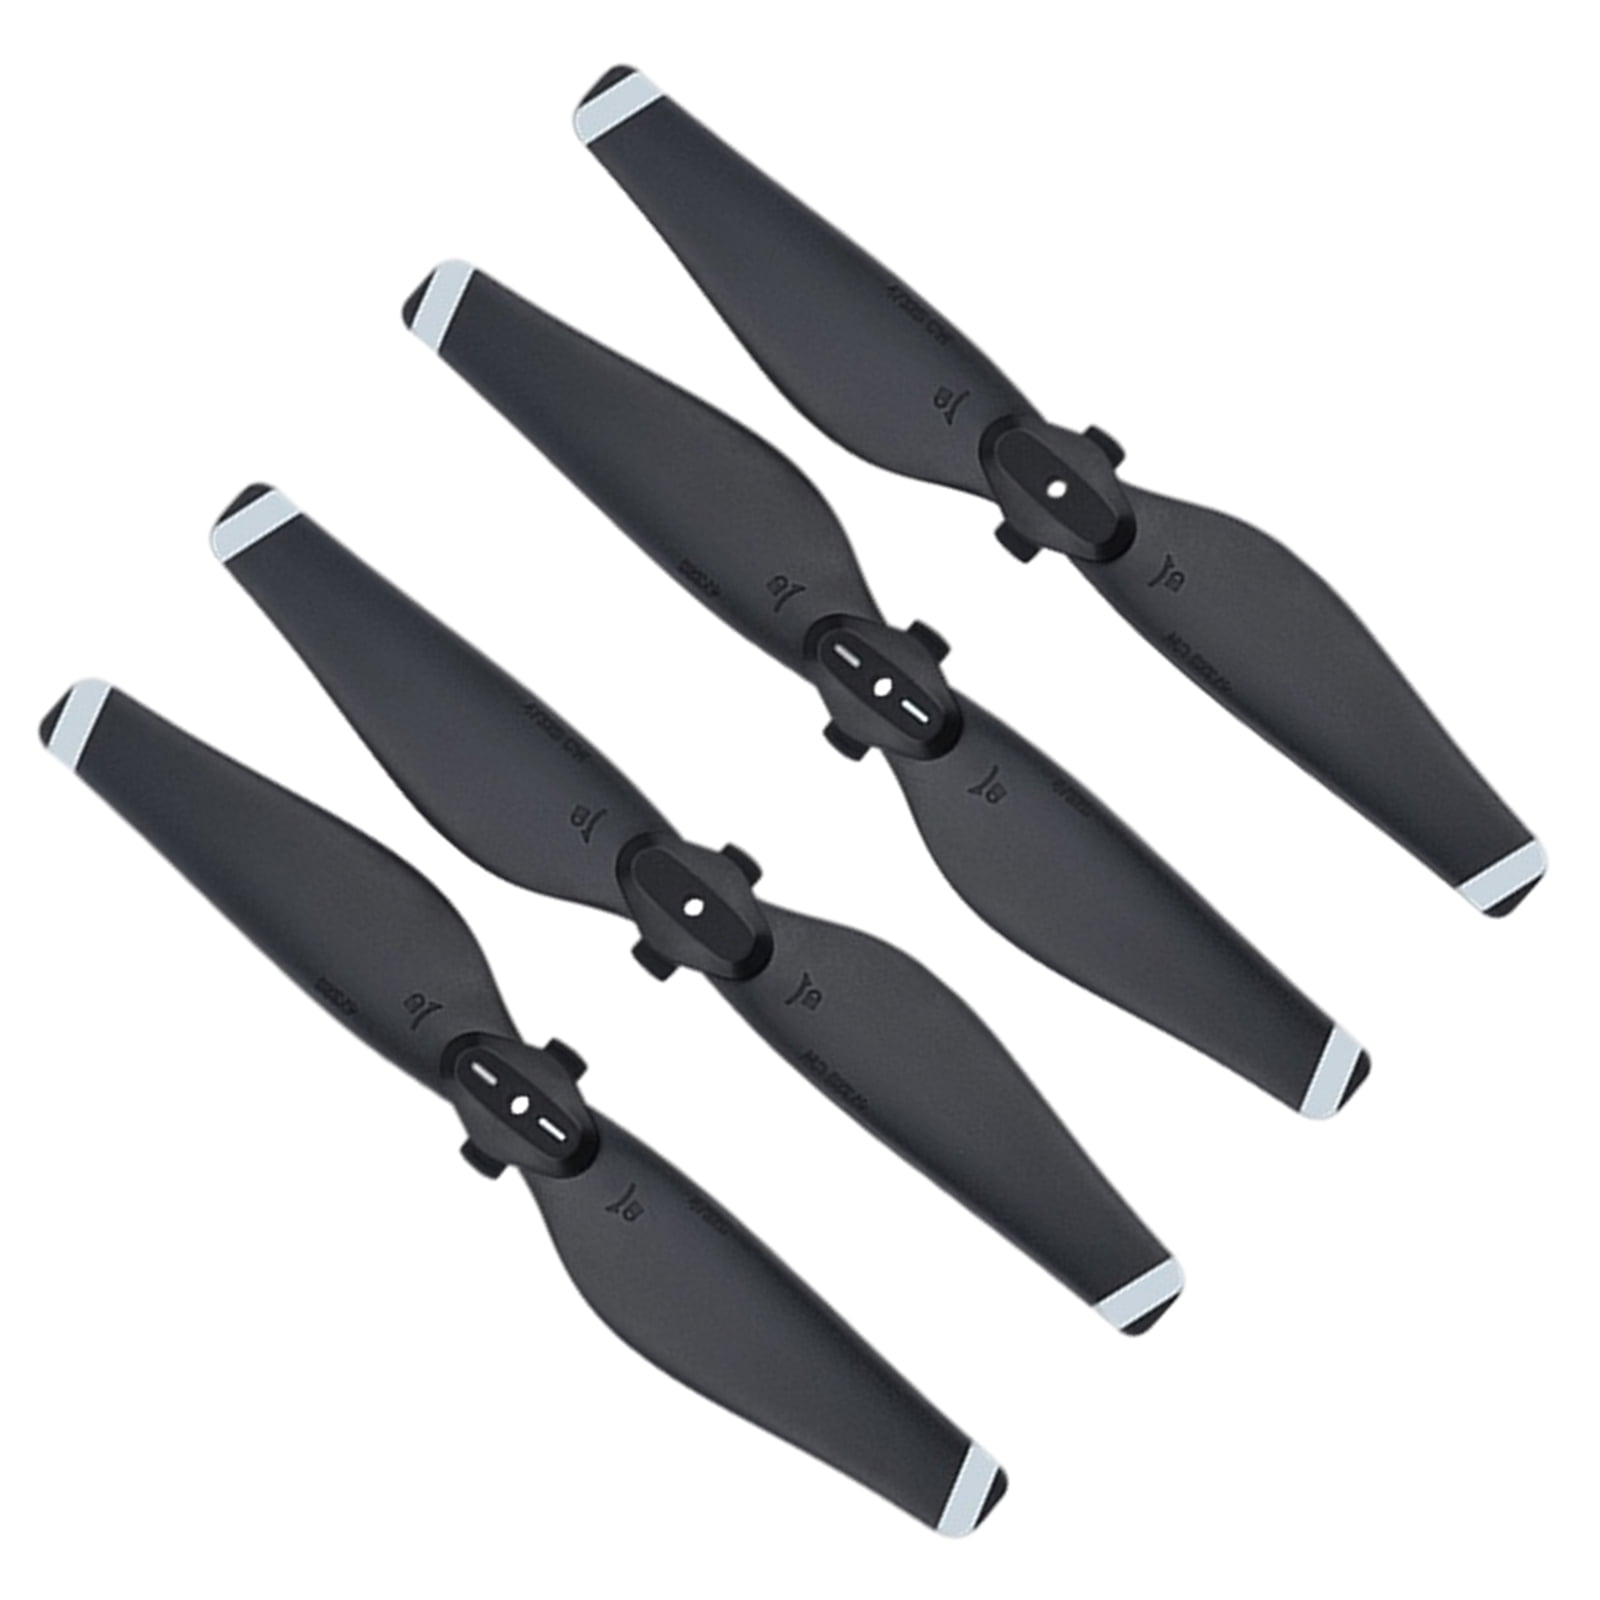 4Pcs Quick Release Propellers Blades Low-Noise for DJI Spark Drone Platinum A747 